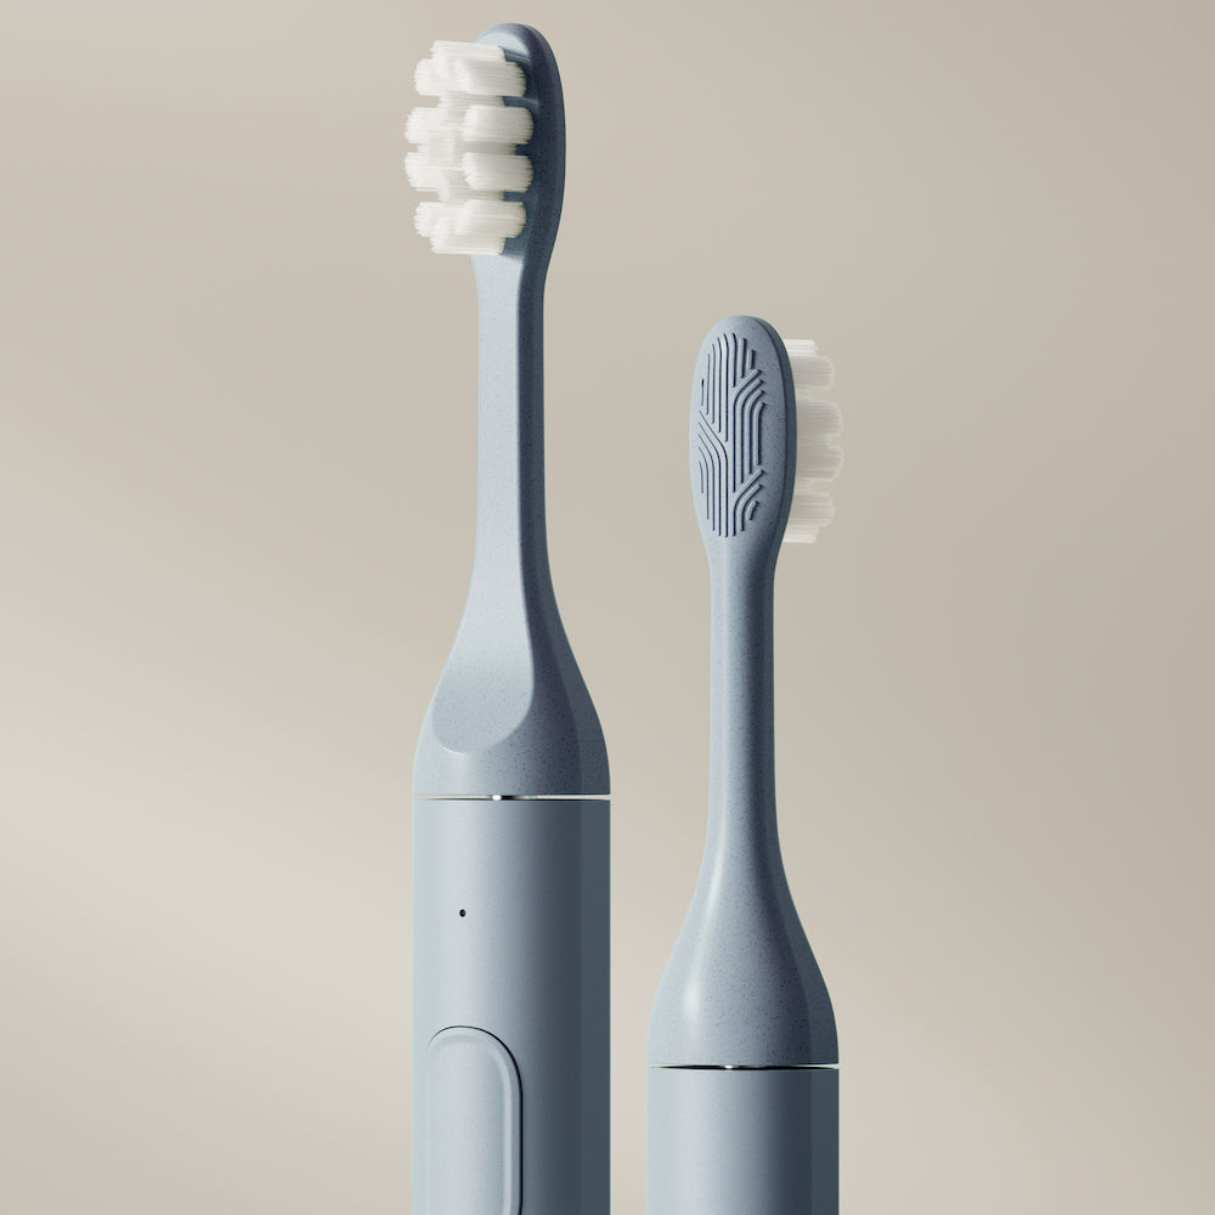 What Is The Back Of A Toothbrush For